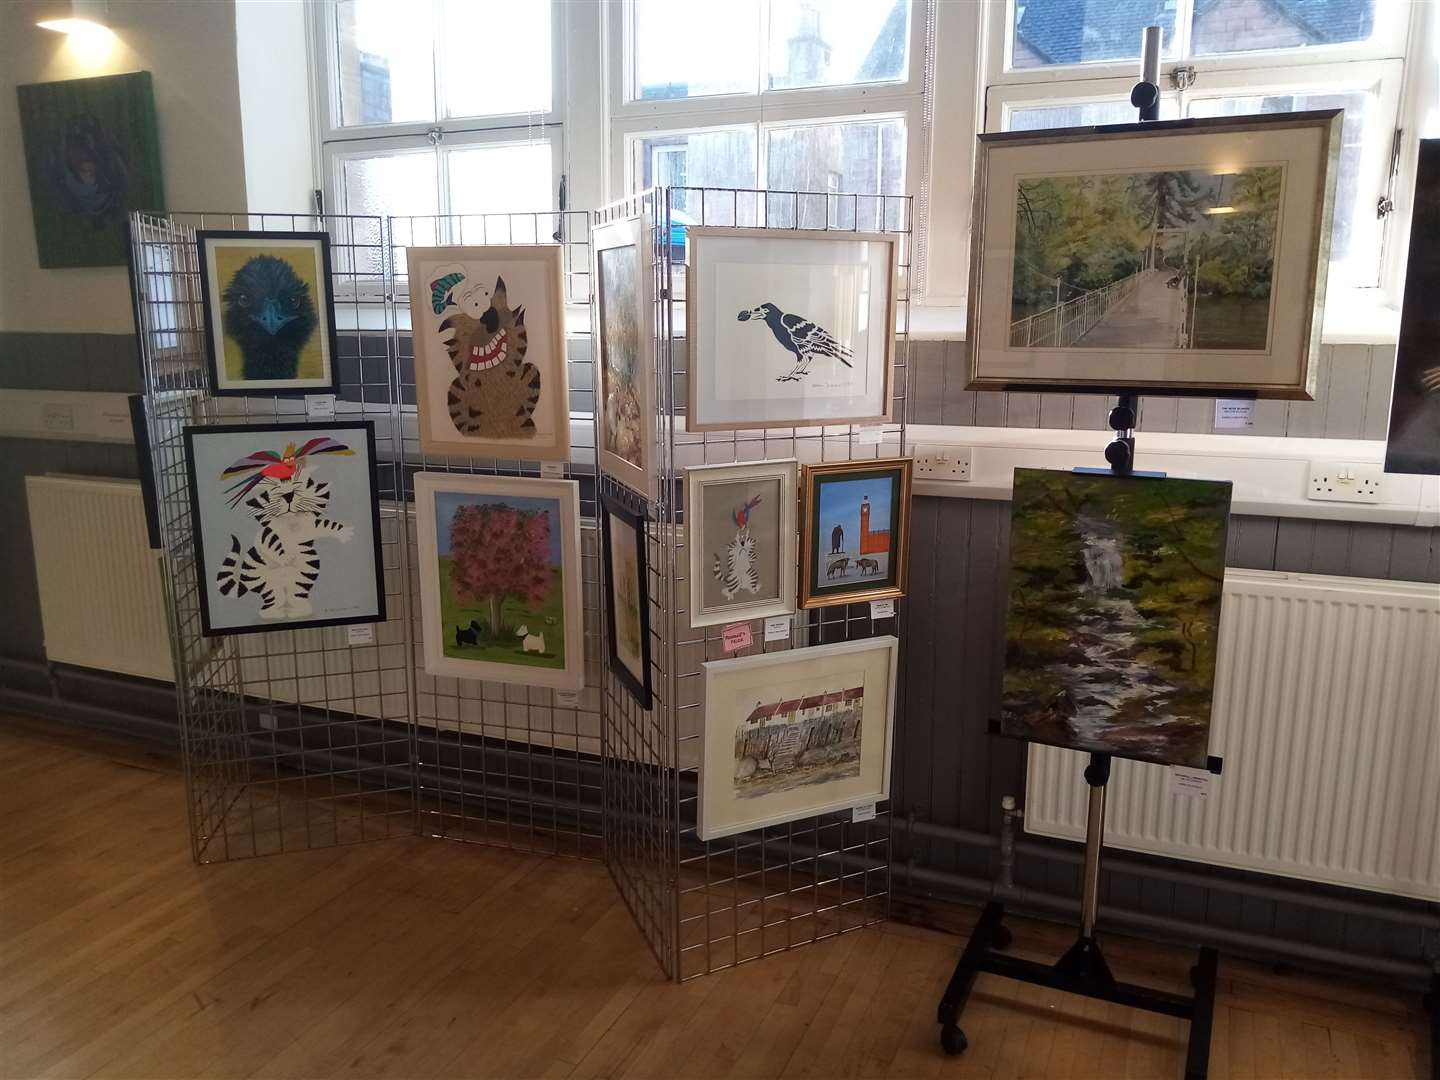 The Art Society of Inverness exhibition is being held at the WASPS Creative Academy.